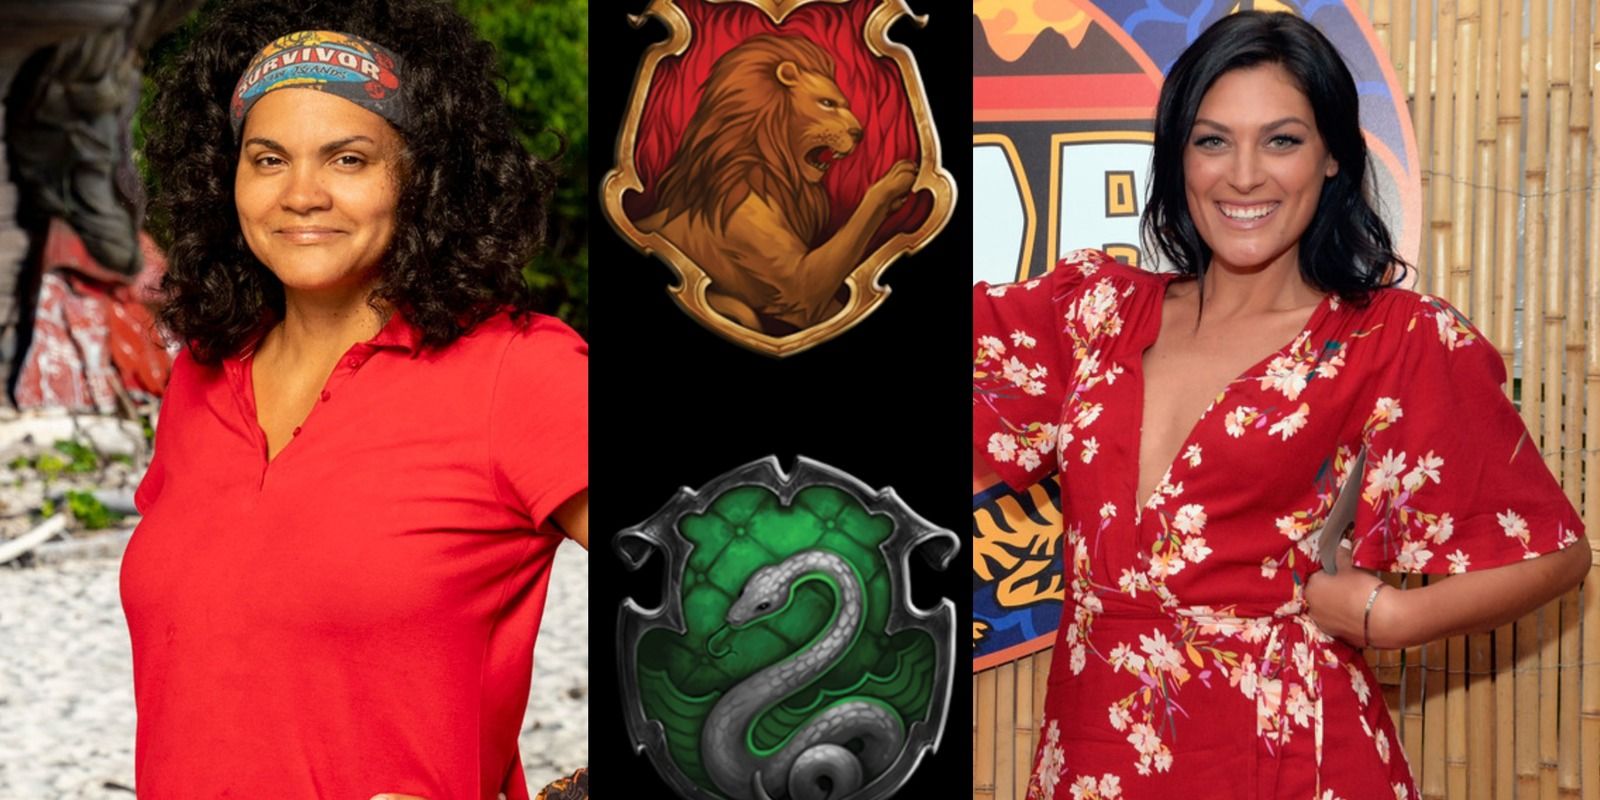 Survivor Winners Sandra Diaz-Twine and Michele Fitzgerald with Gryffindor and Slytherin badges between them